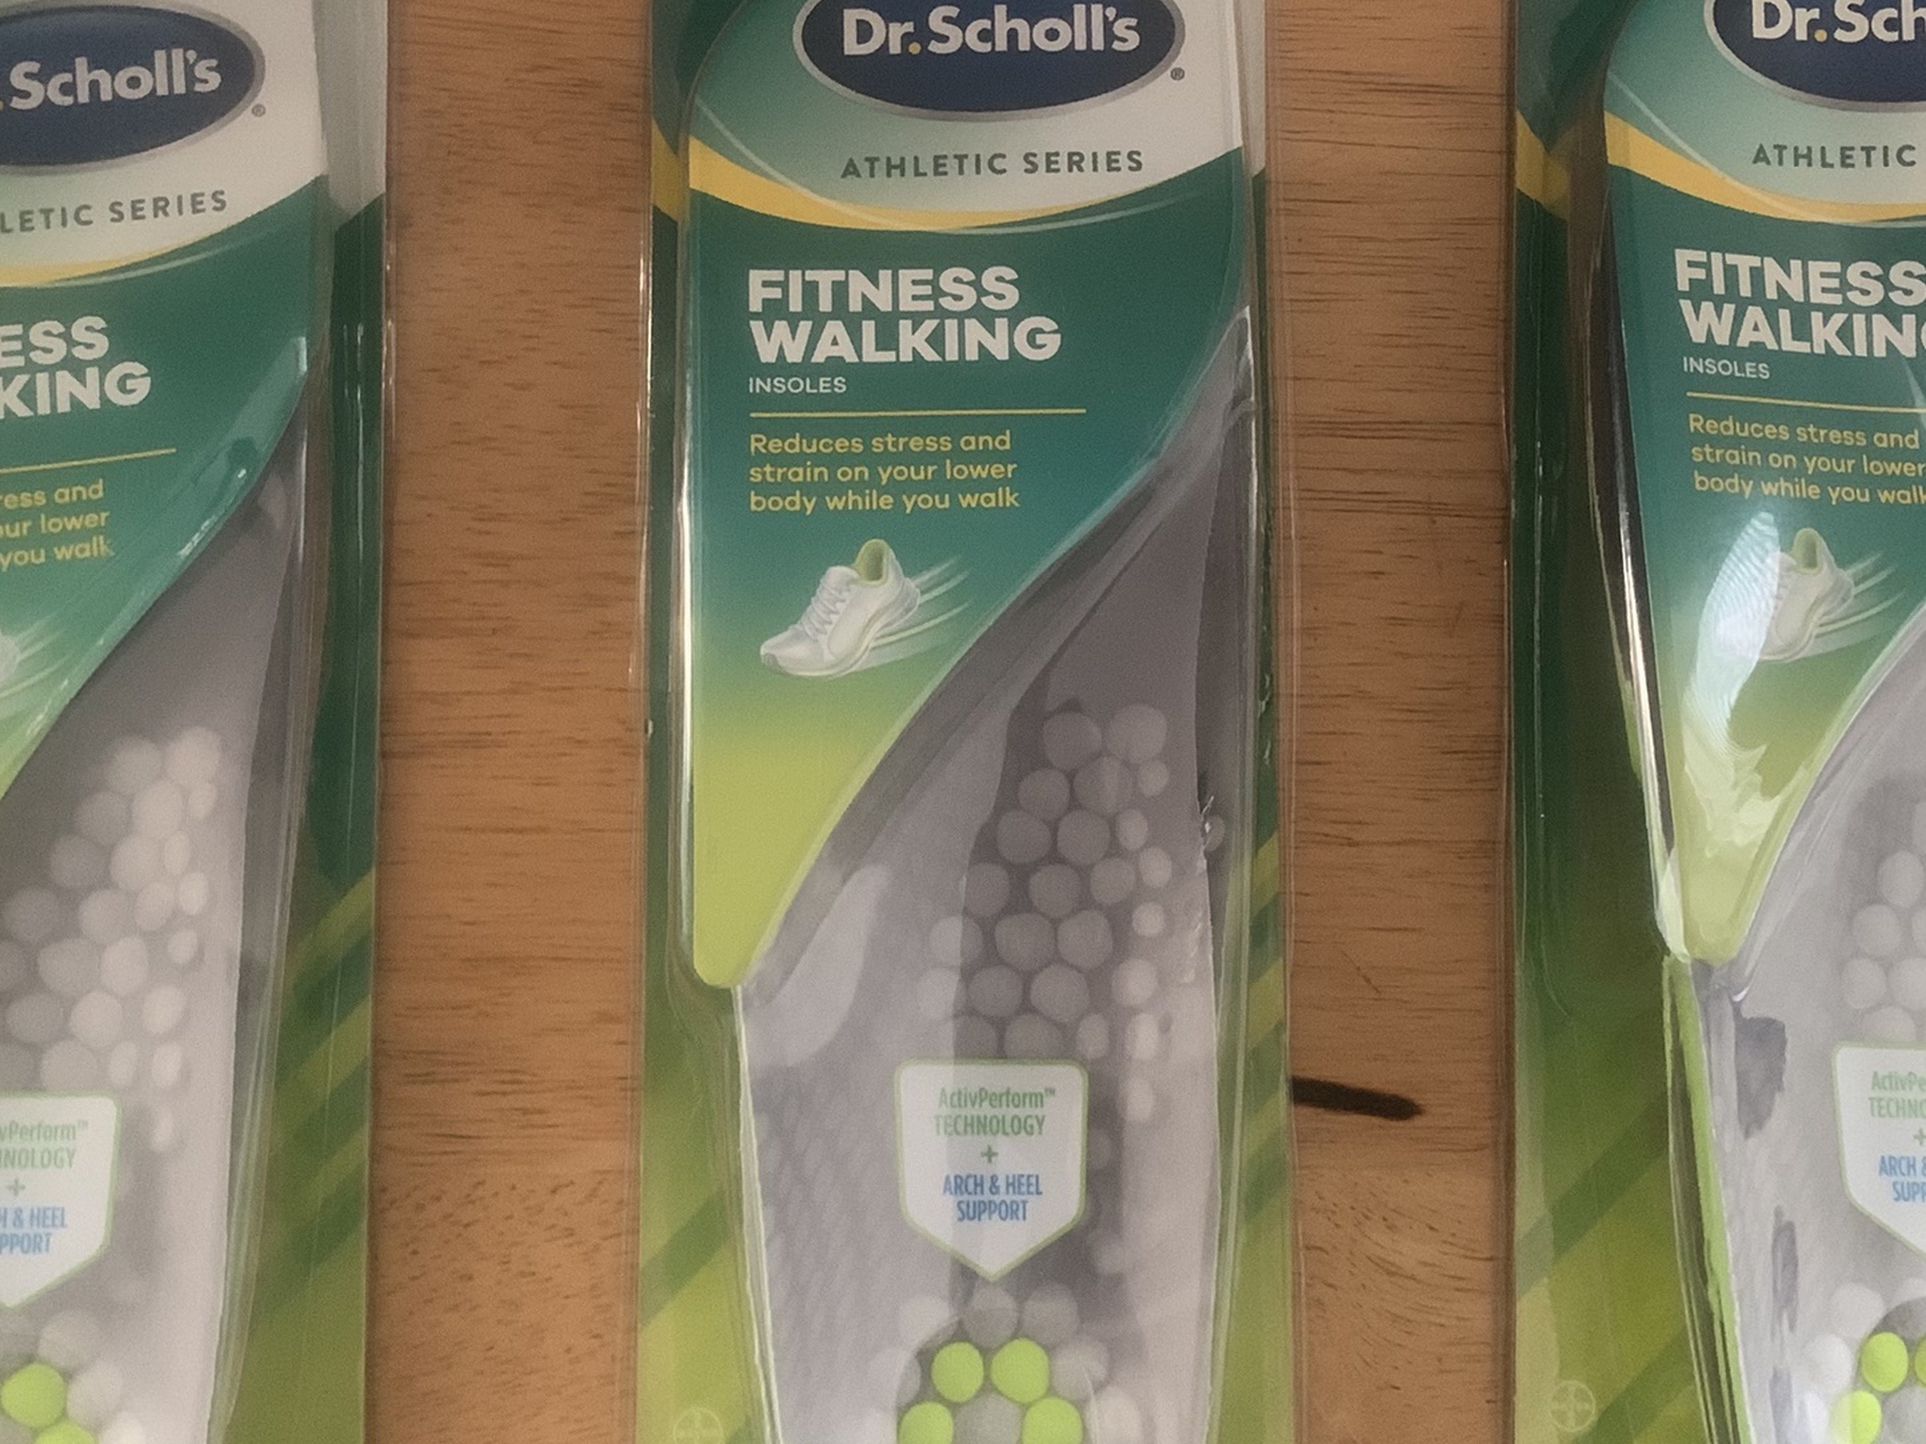 Dr Scholl’s Fitness Walking Insoles